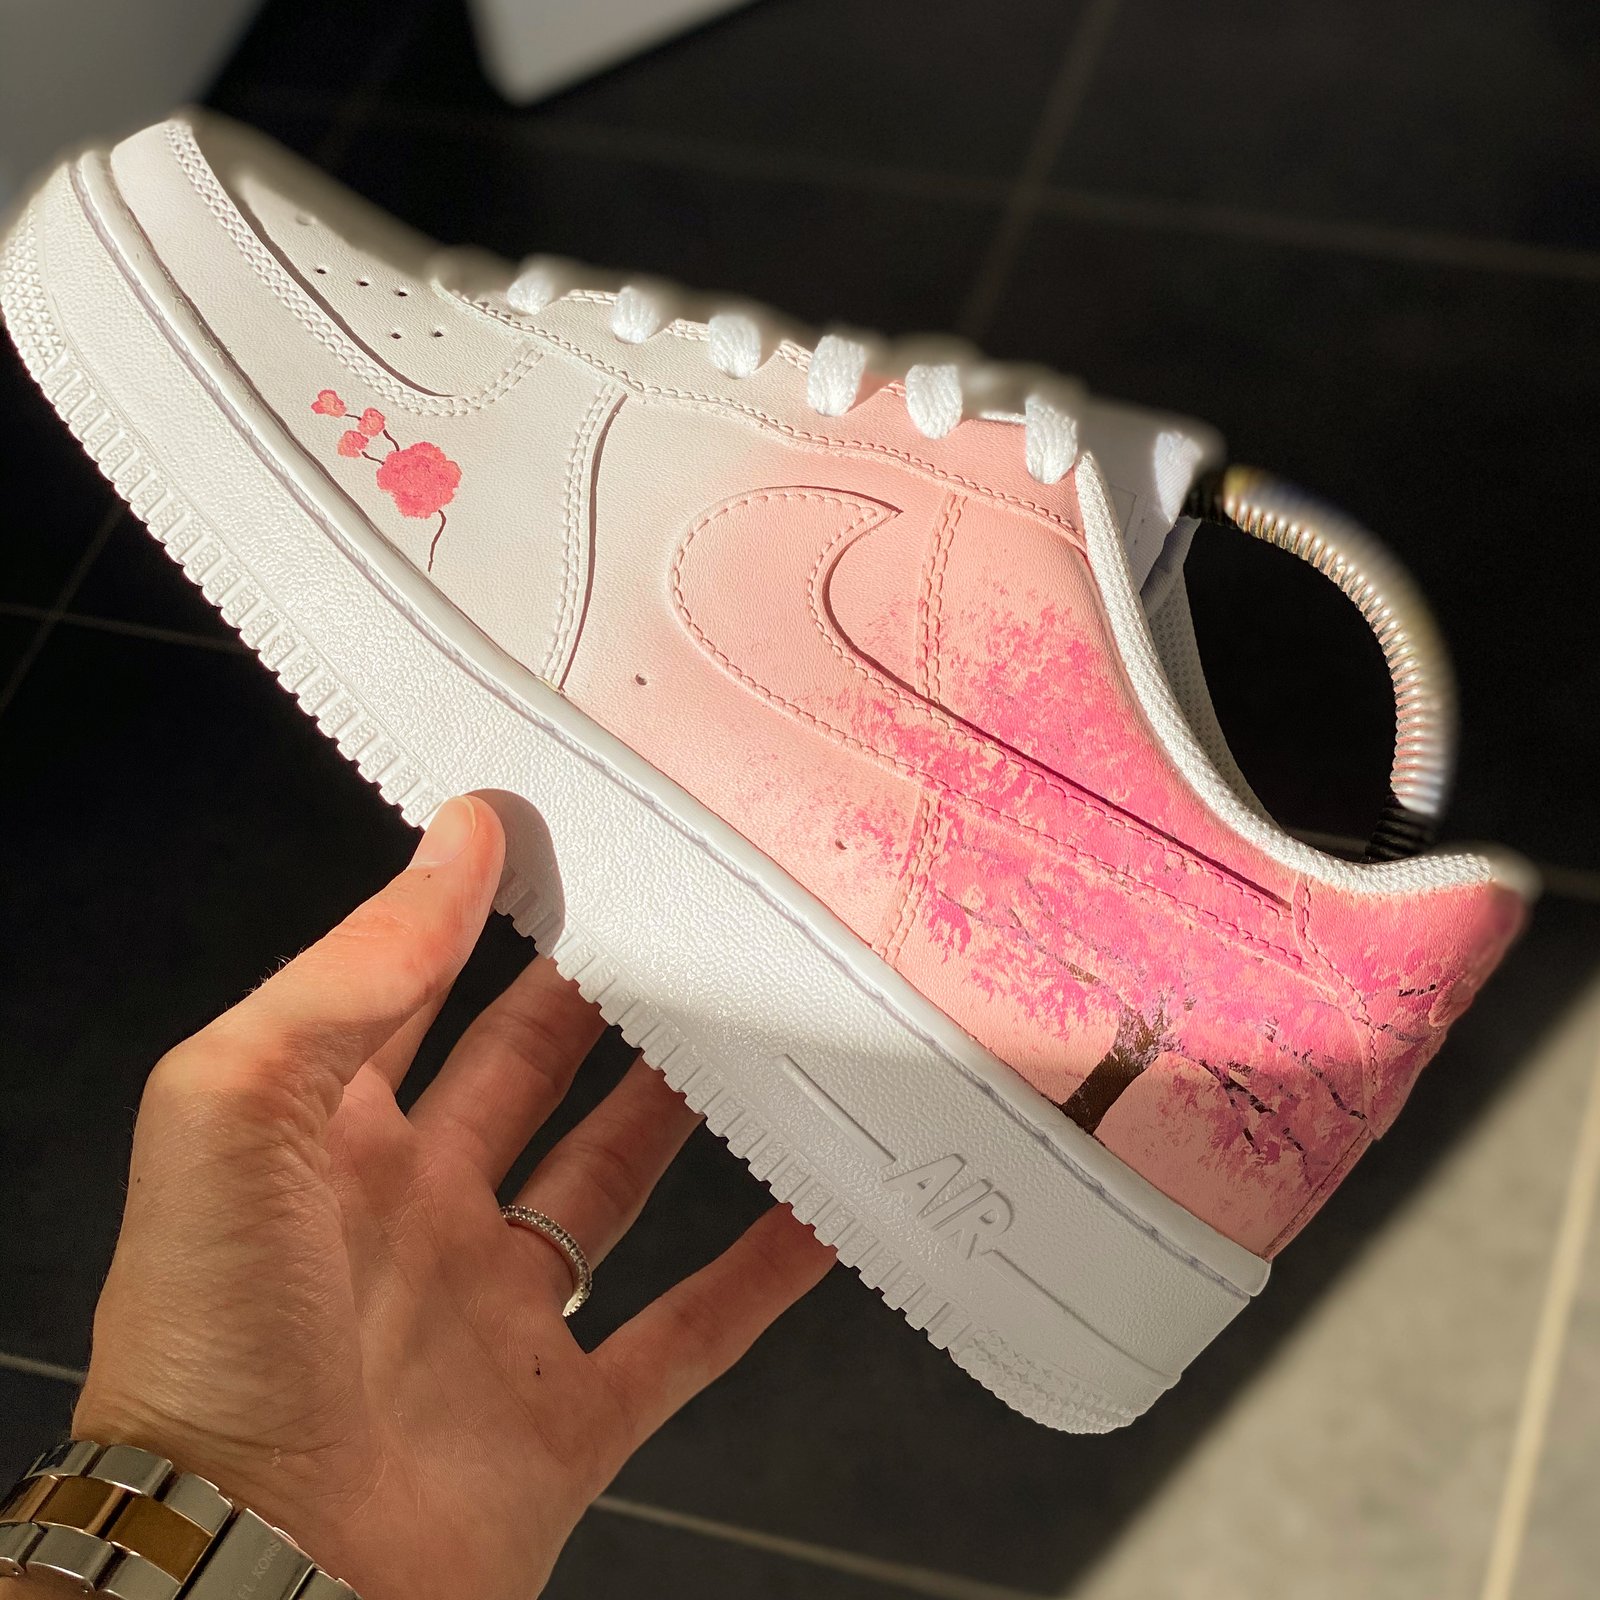 air force 1 cherry blossom